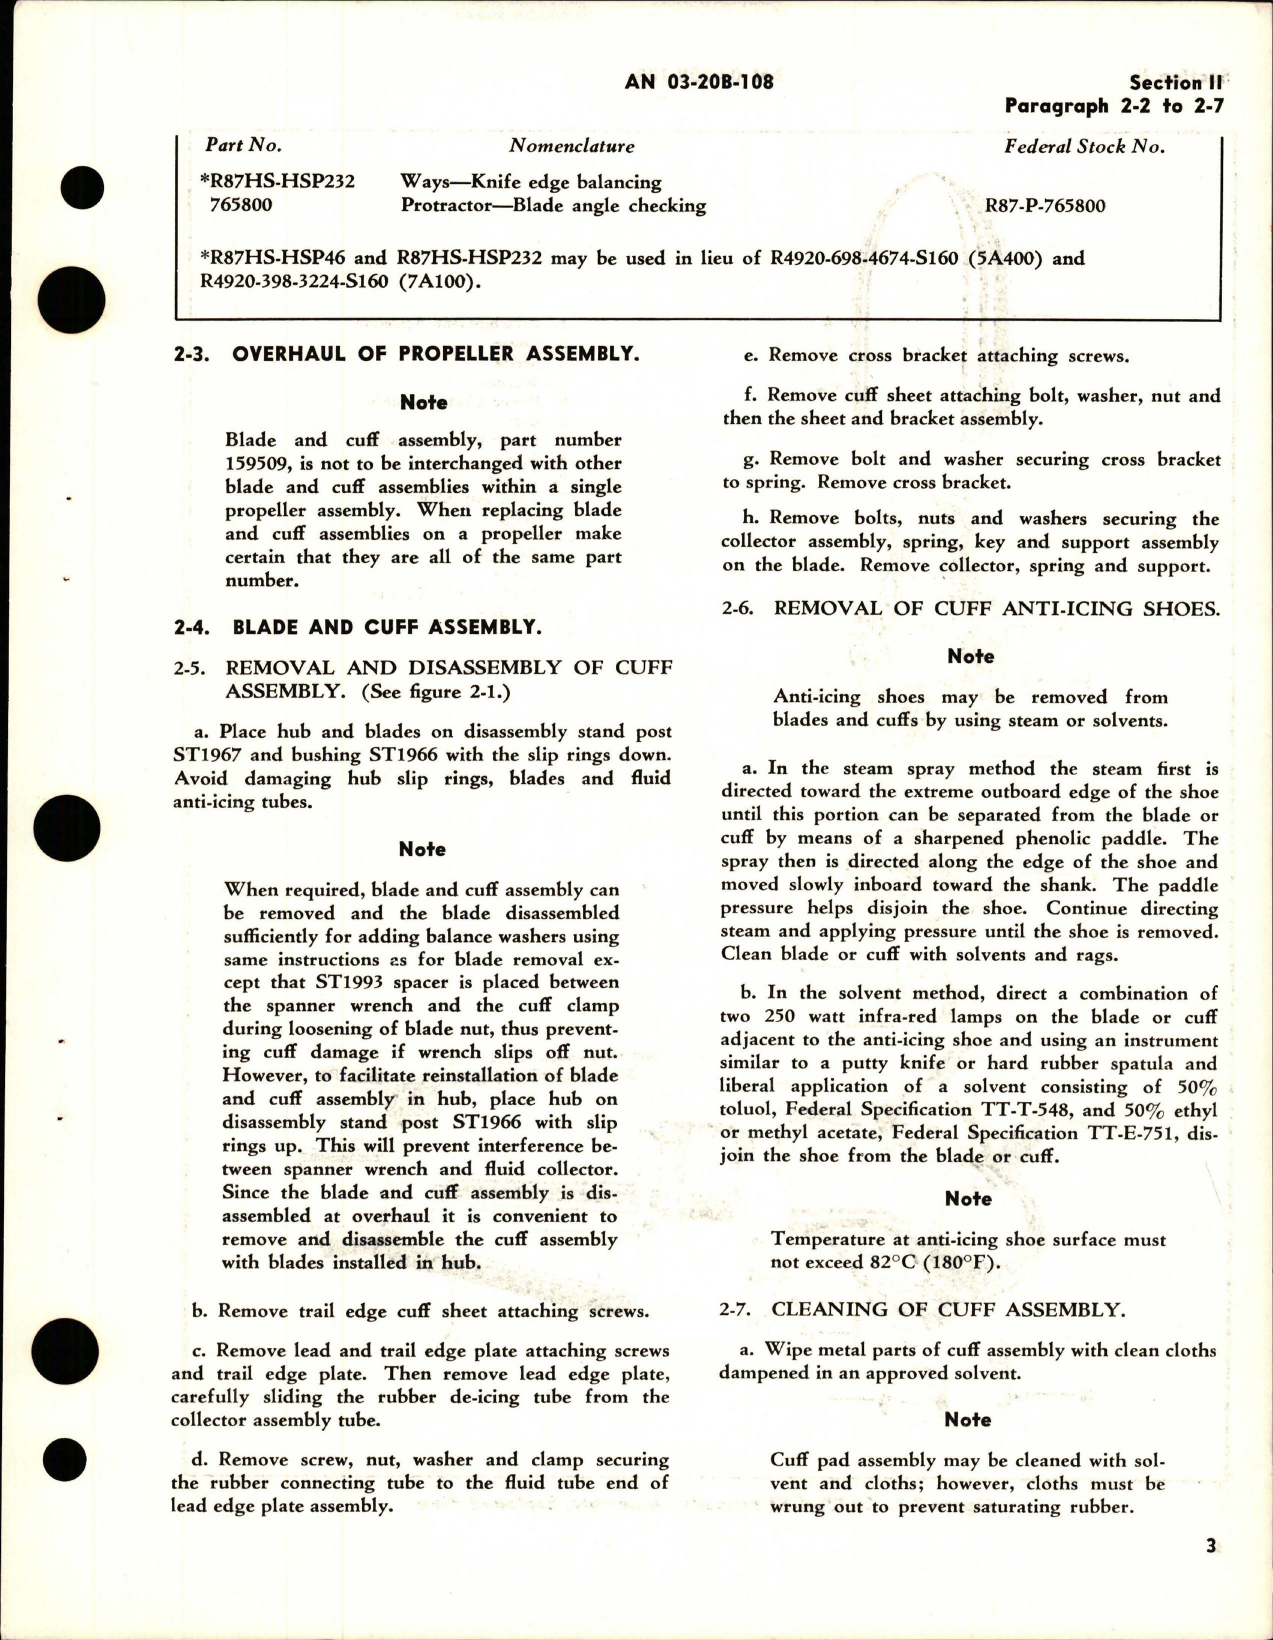 Sample page 9 from AirCorps Library document: Overhaul Instructions for Pitch Lever Type Electric Propeller - Models C432S-C2, C432S-C22, C432S-C24, C432S-C-26 